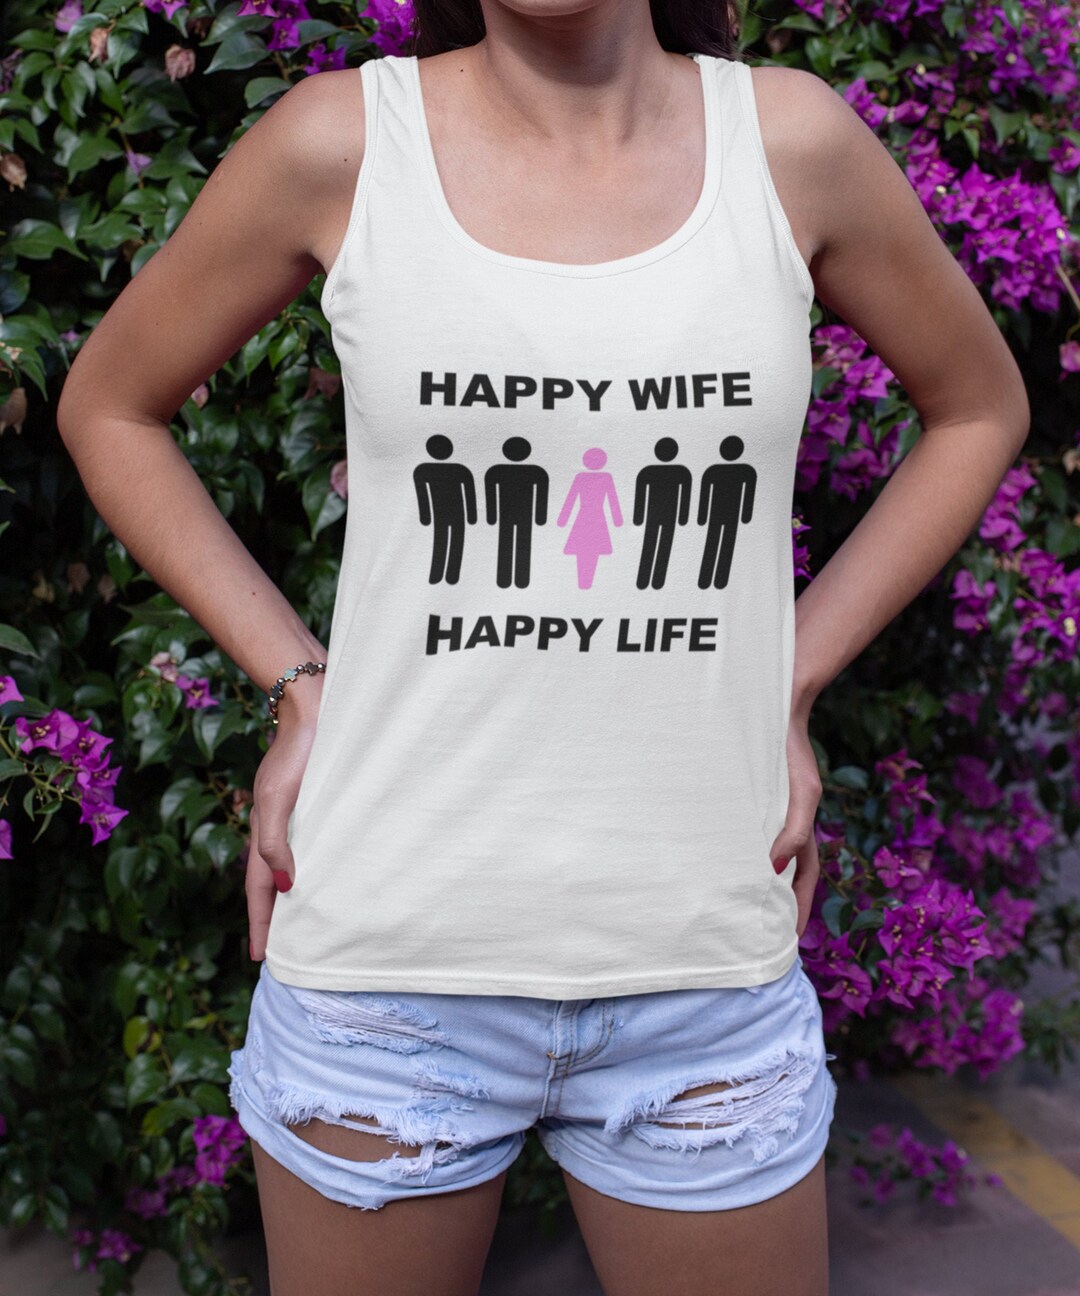 Hotwife Clothing Gangbang Shirt Tank Top Happy Wife Happy picture